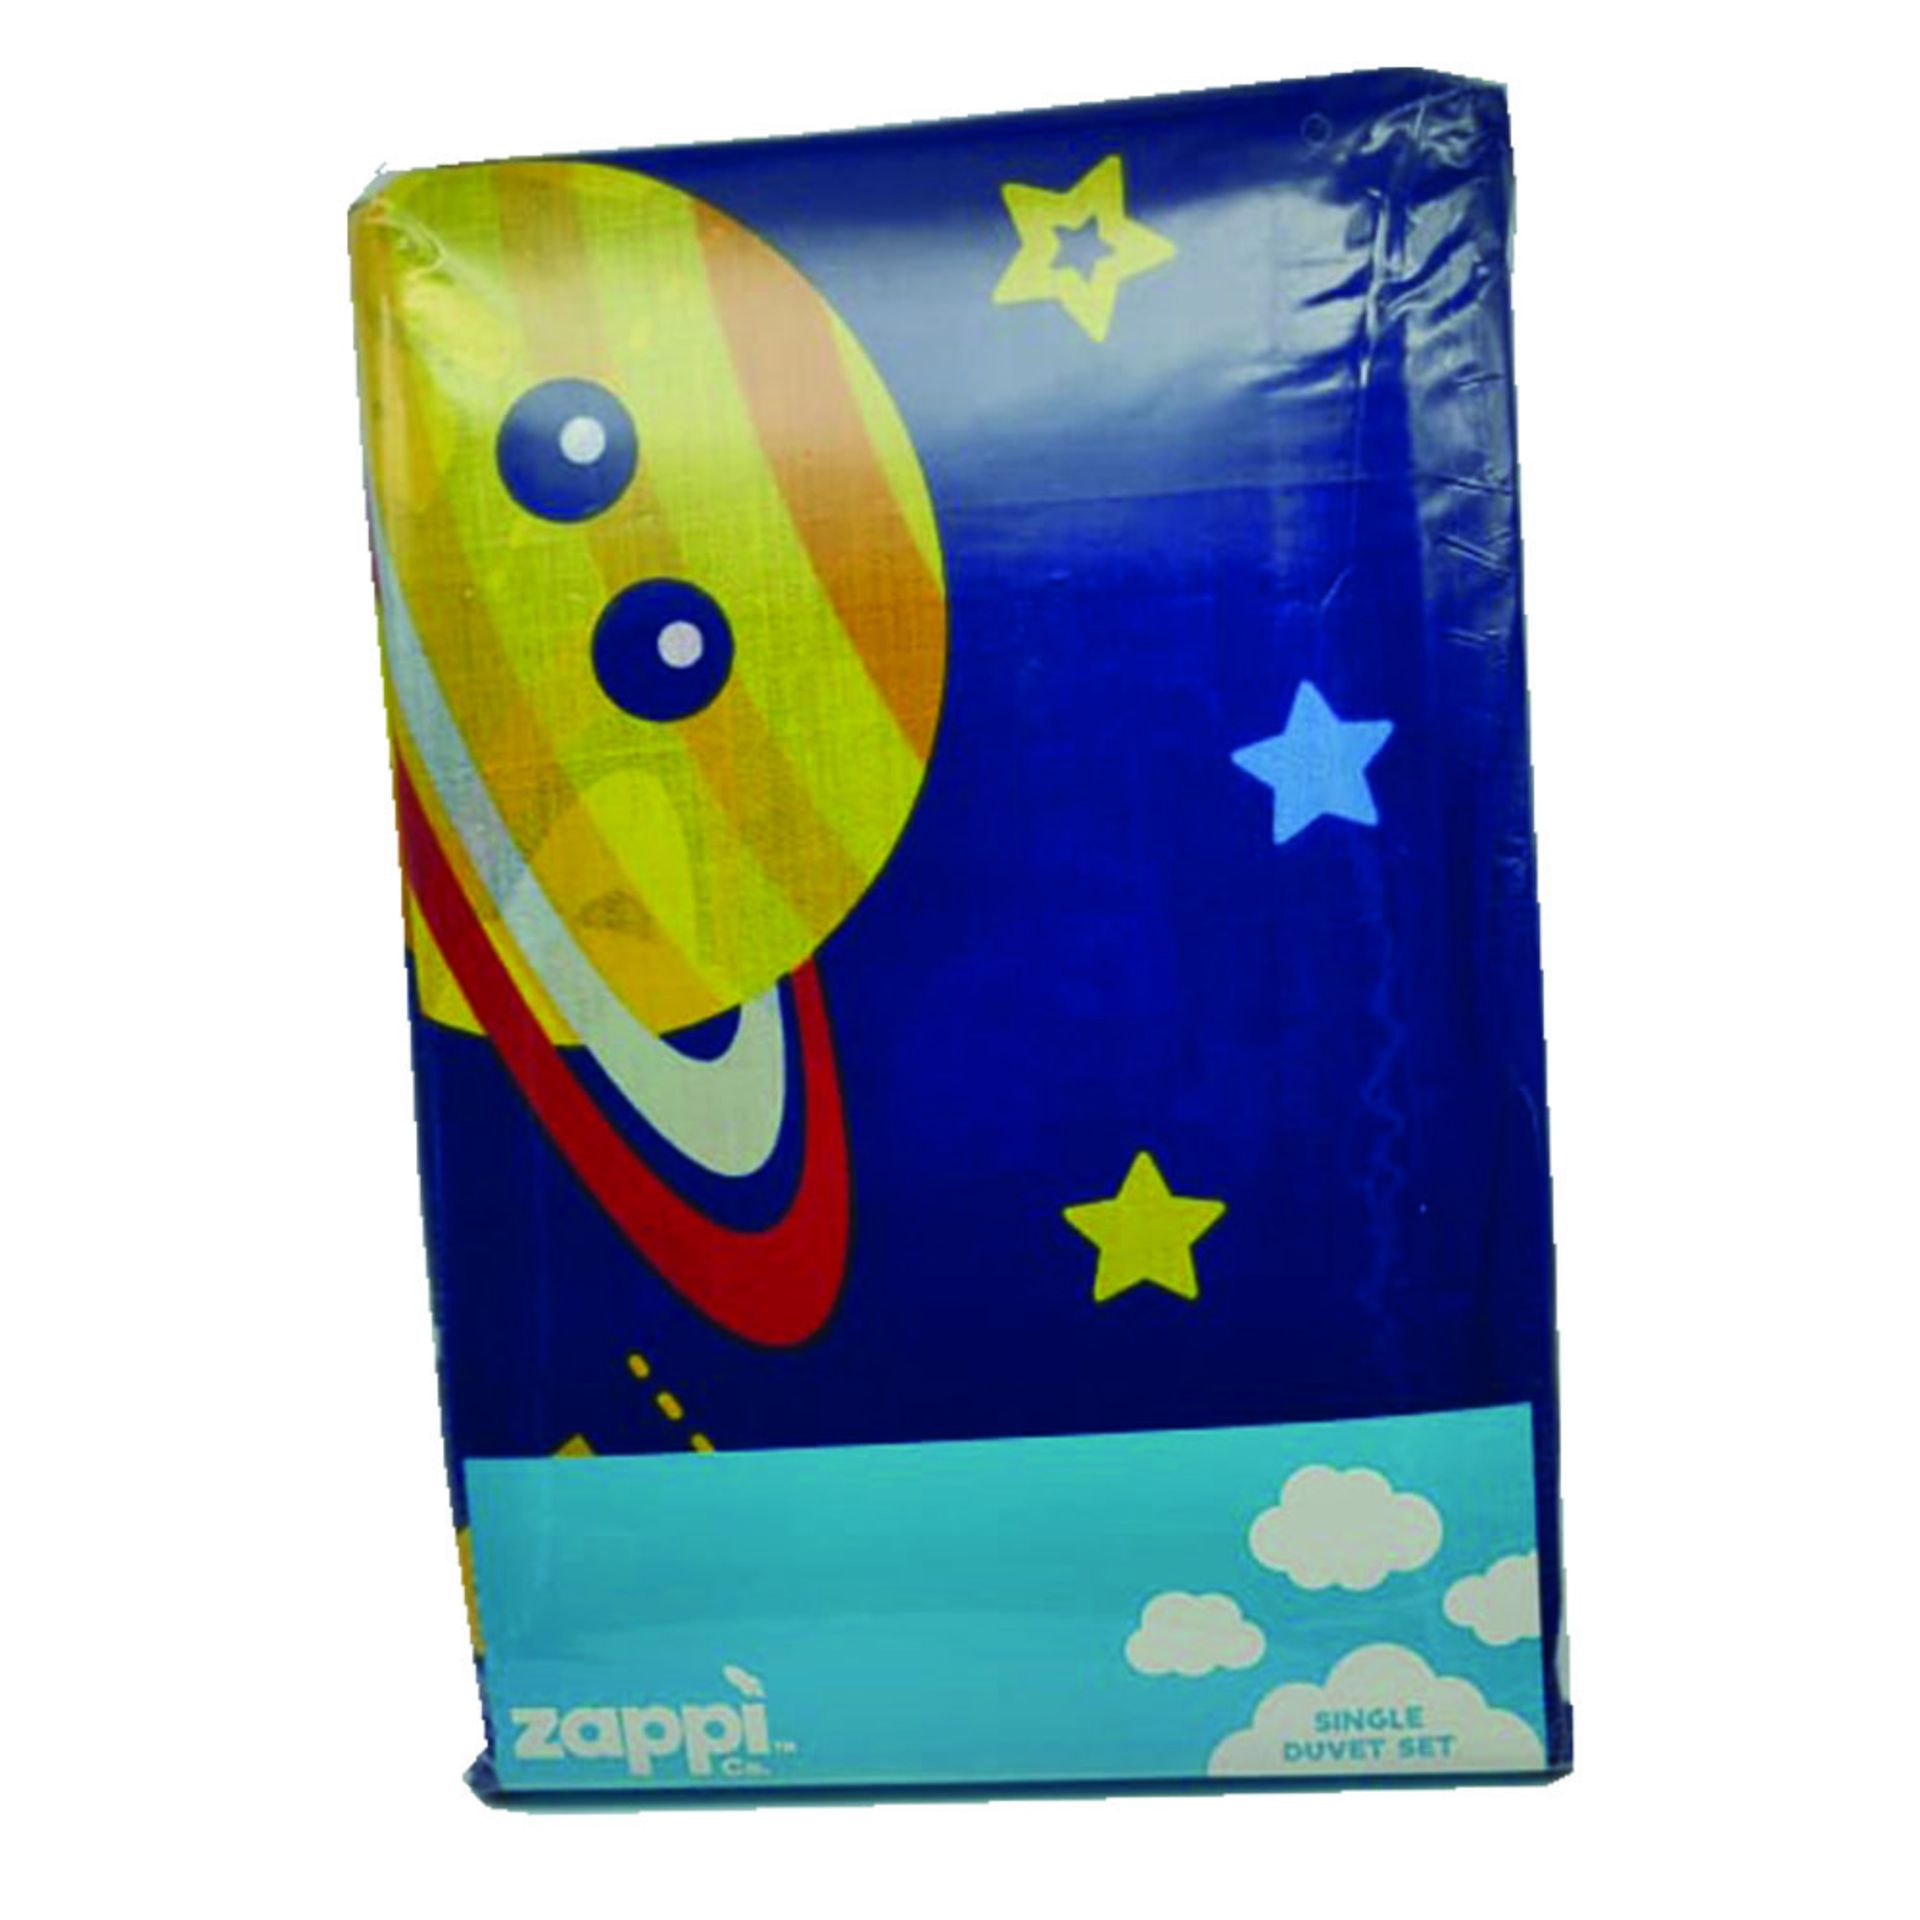 12x Kids' Space Themed Duvet Sets - Image 3 of 3